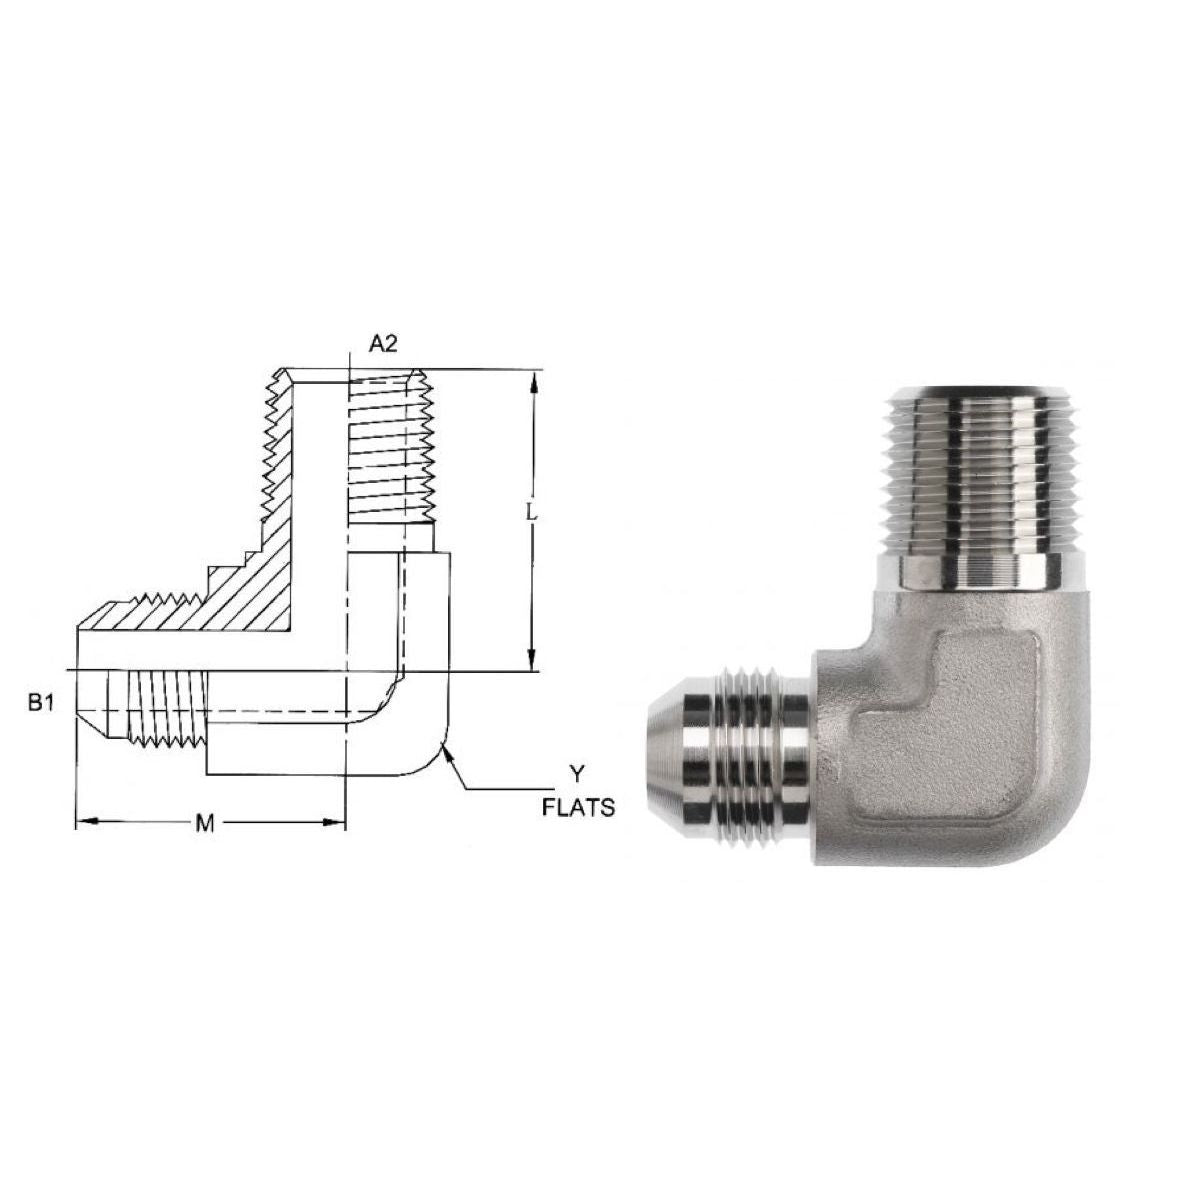 2501-16-16-SS : OneHydraulics 90-Degree Elbow, 1 Male JIC x 1 Male NPT, Stainless Steel, 4800psi